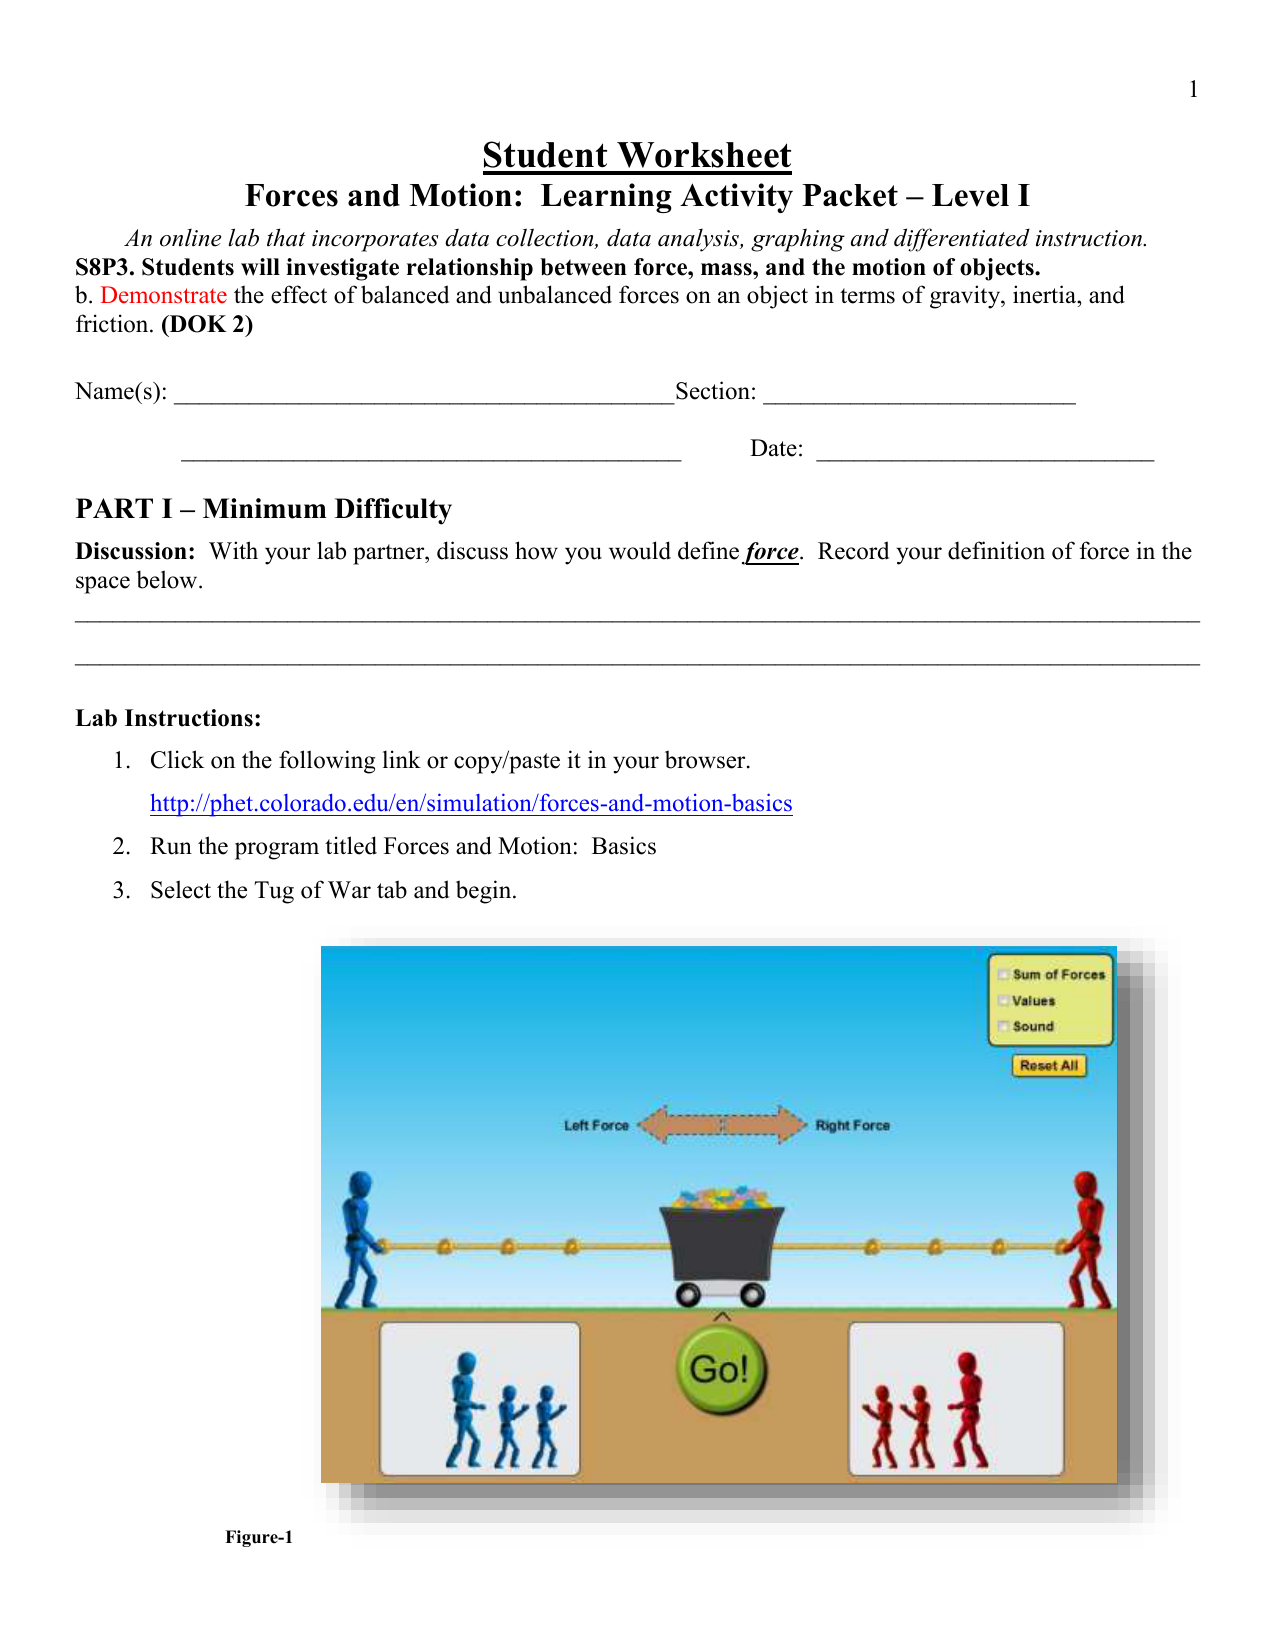 Student Worksheet Forces and Motion: Learning Activity Packet Within Forces And Motion Worksheet